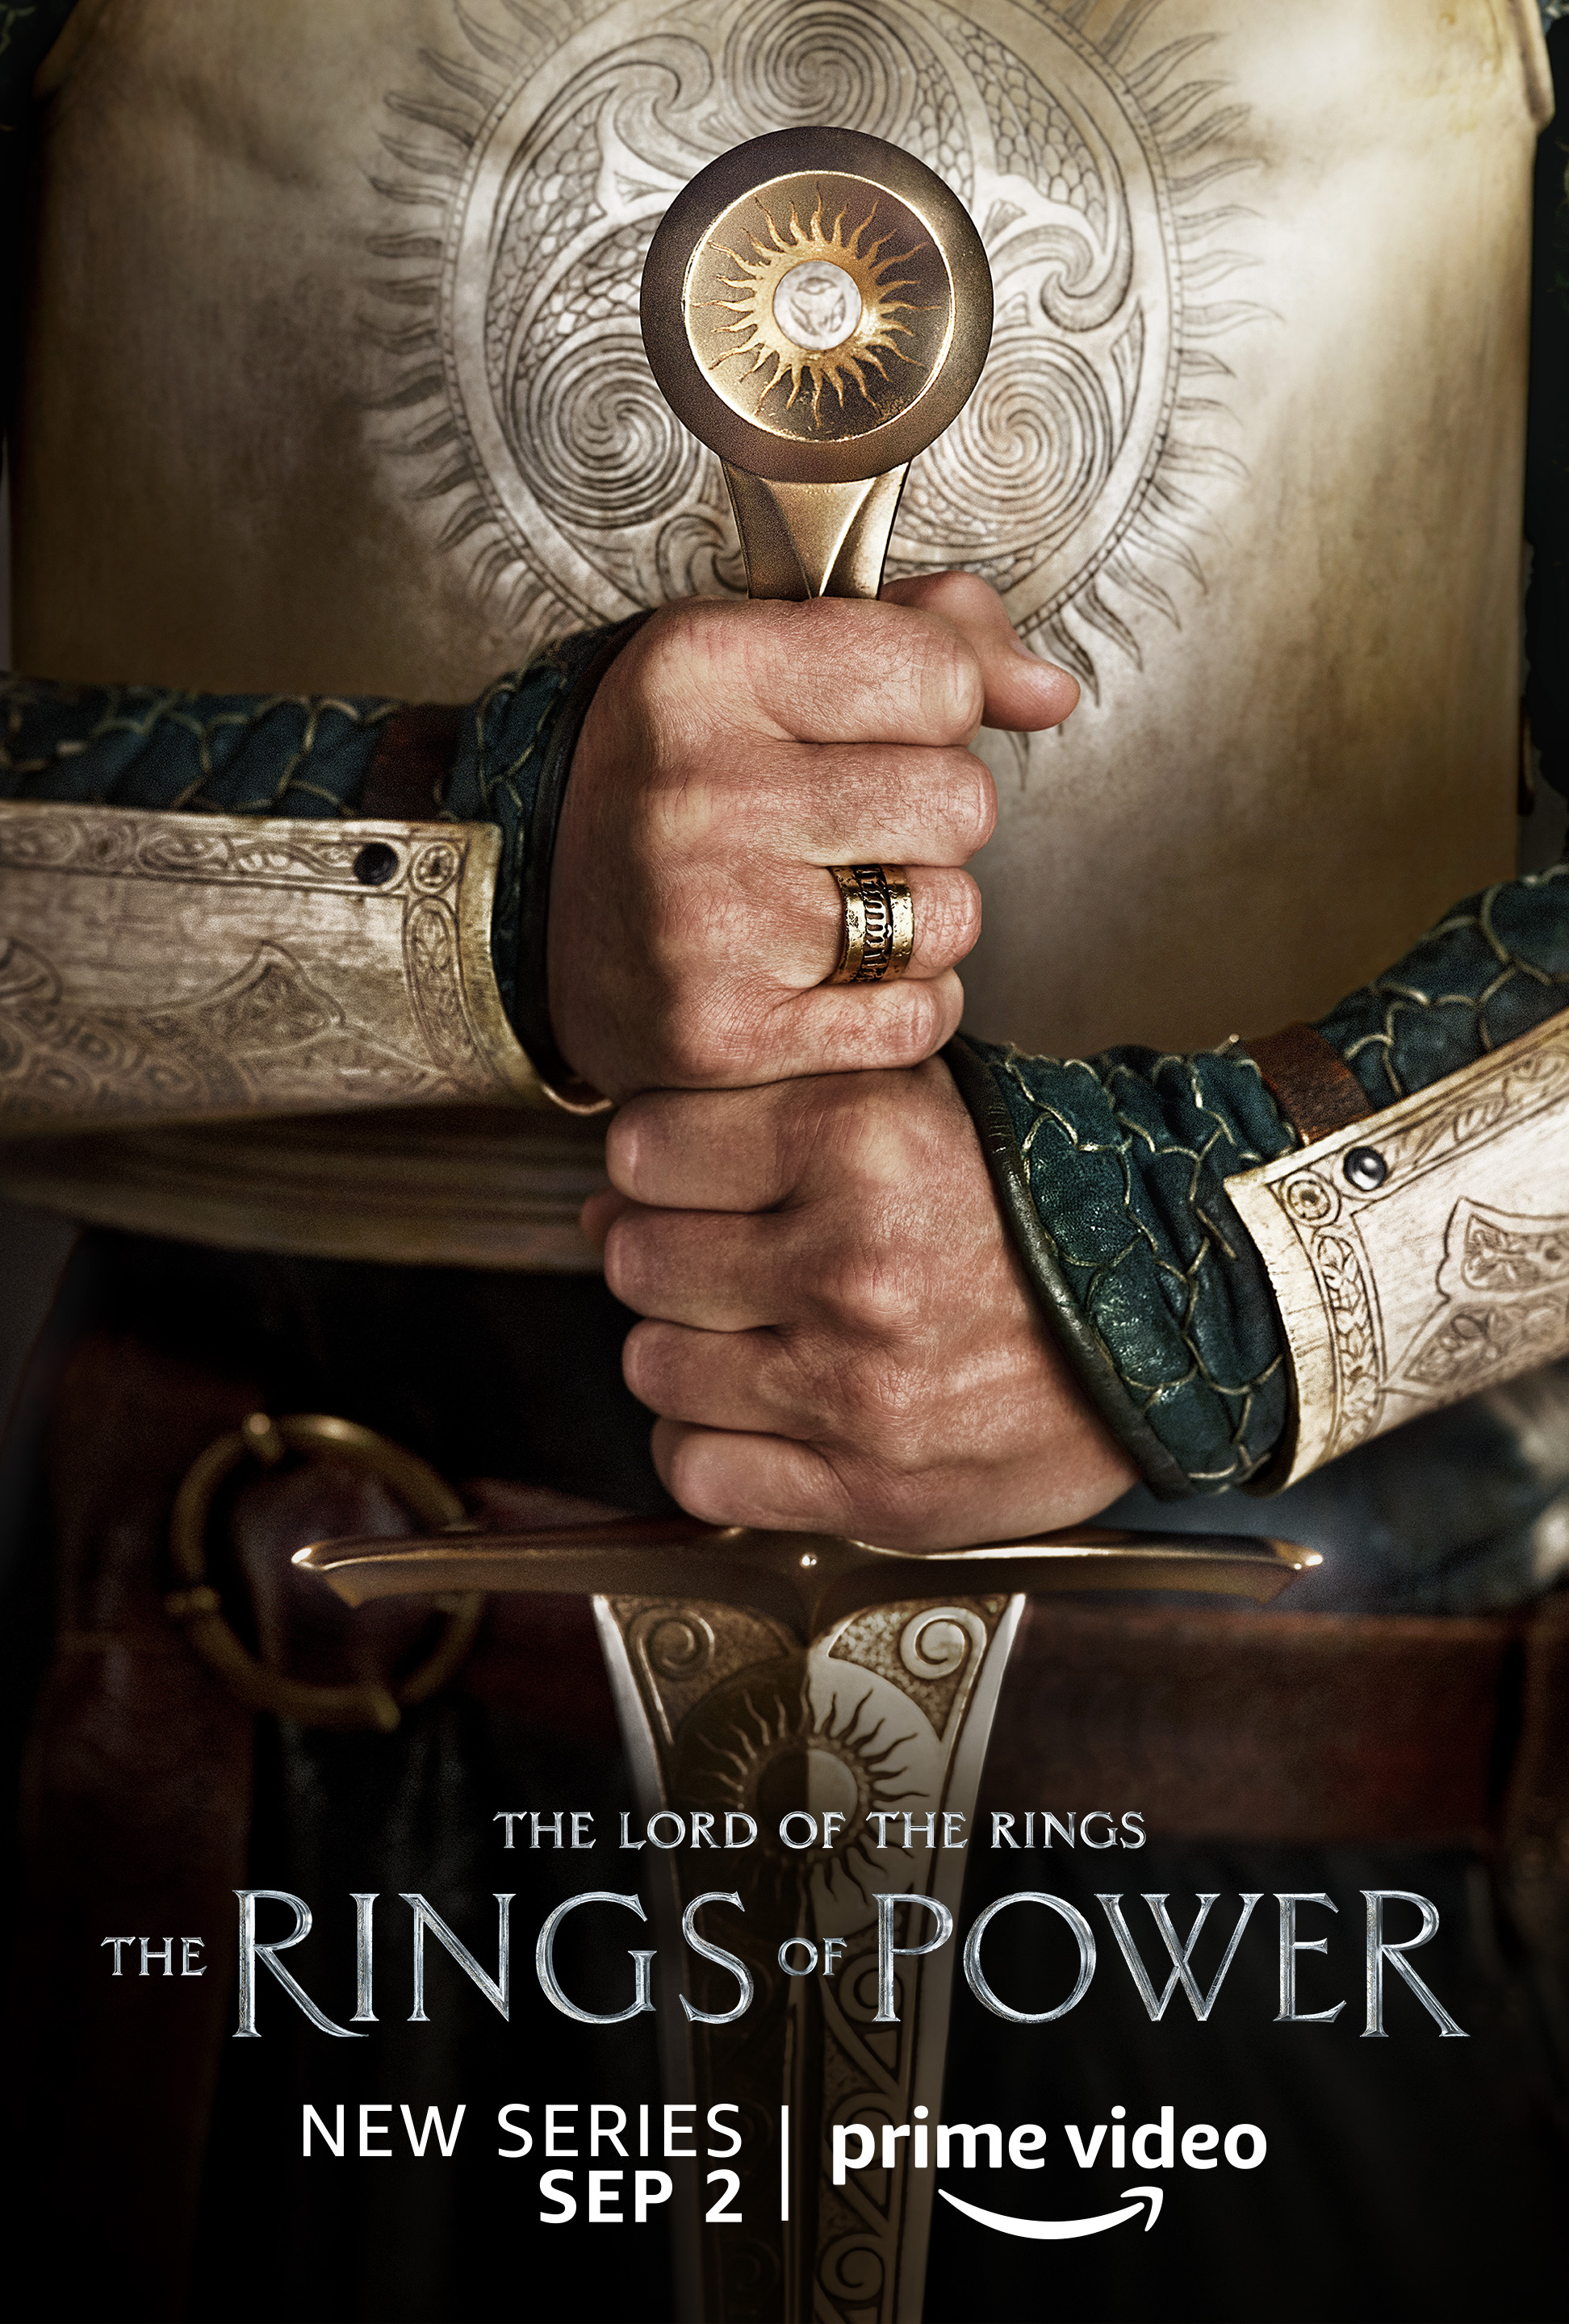 Pan prstenu: Prsteny moci / The Lord of the Rings: The Rings of Power S01E01 (CZ/EN)(2022)(WEB-DL)(1080p) = CSFD 60%